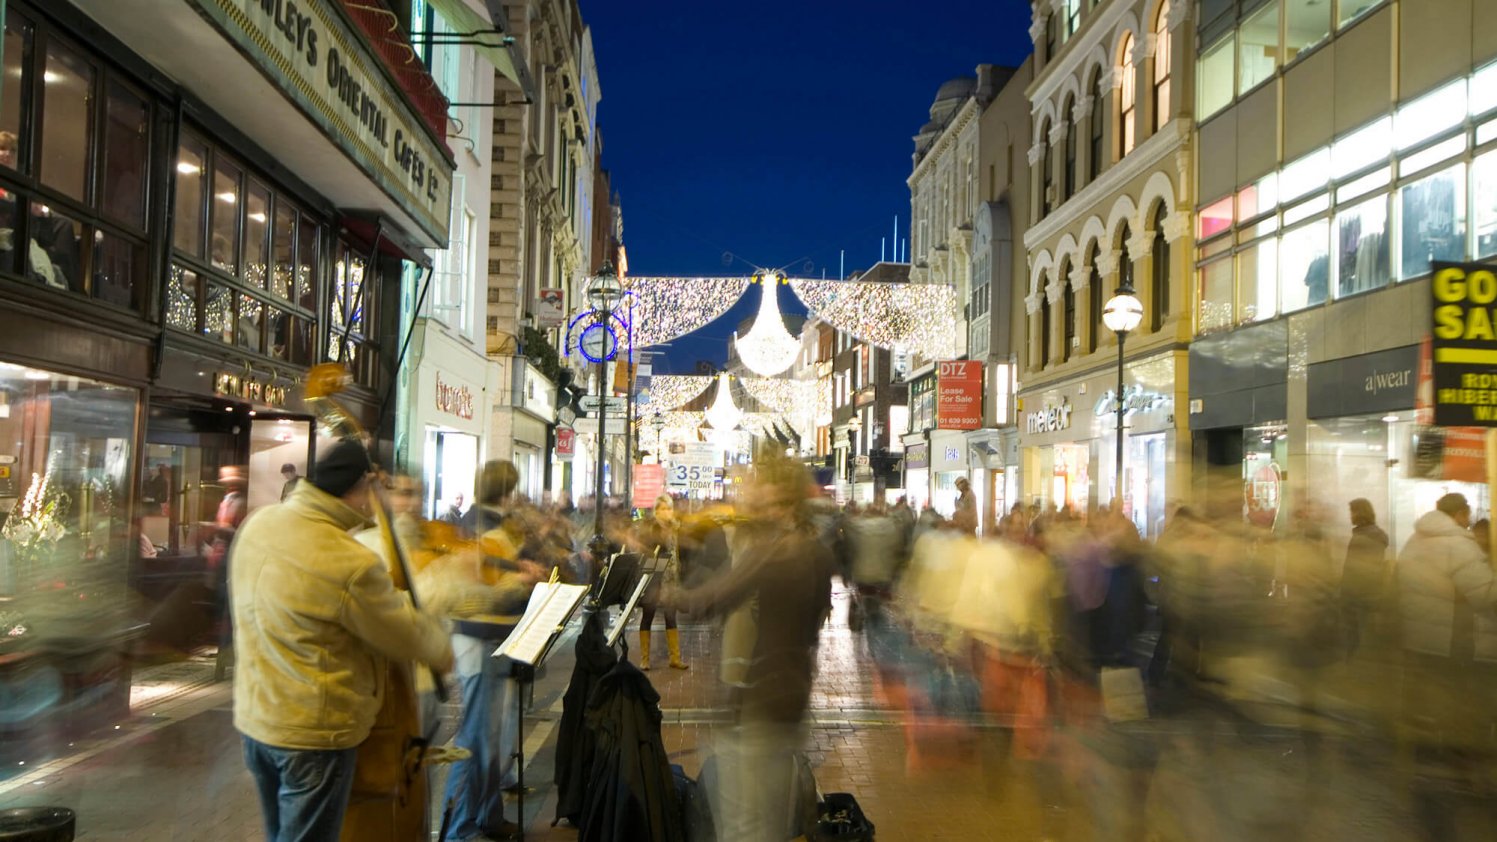 Hustle and bustle on Grafton Street at night including buskers